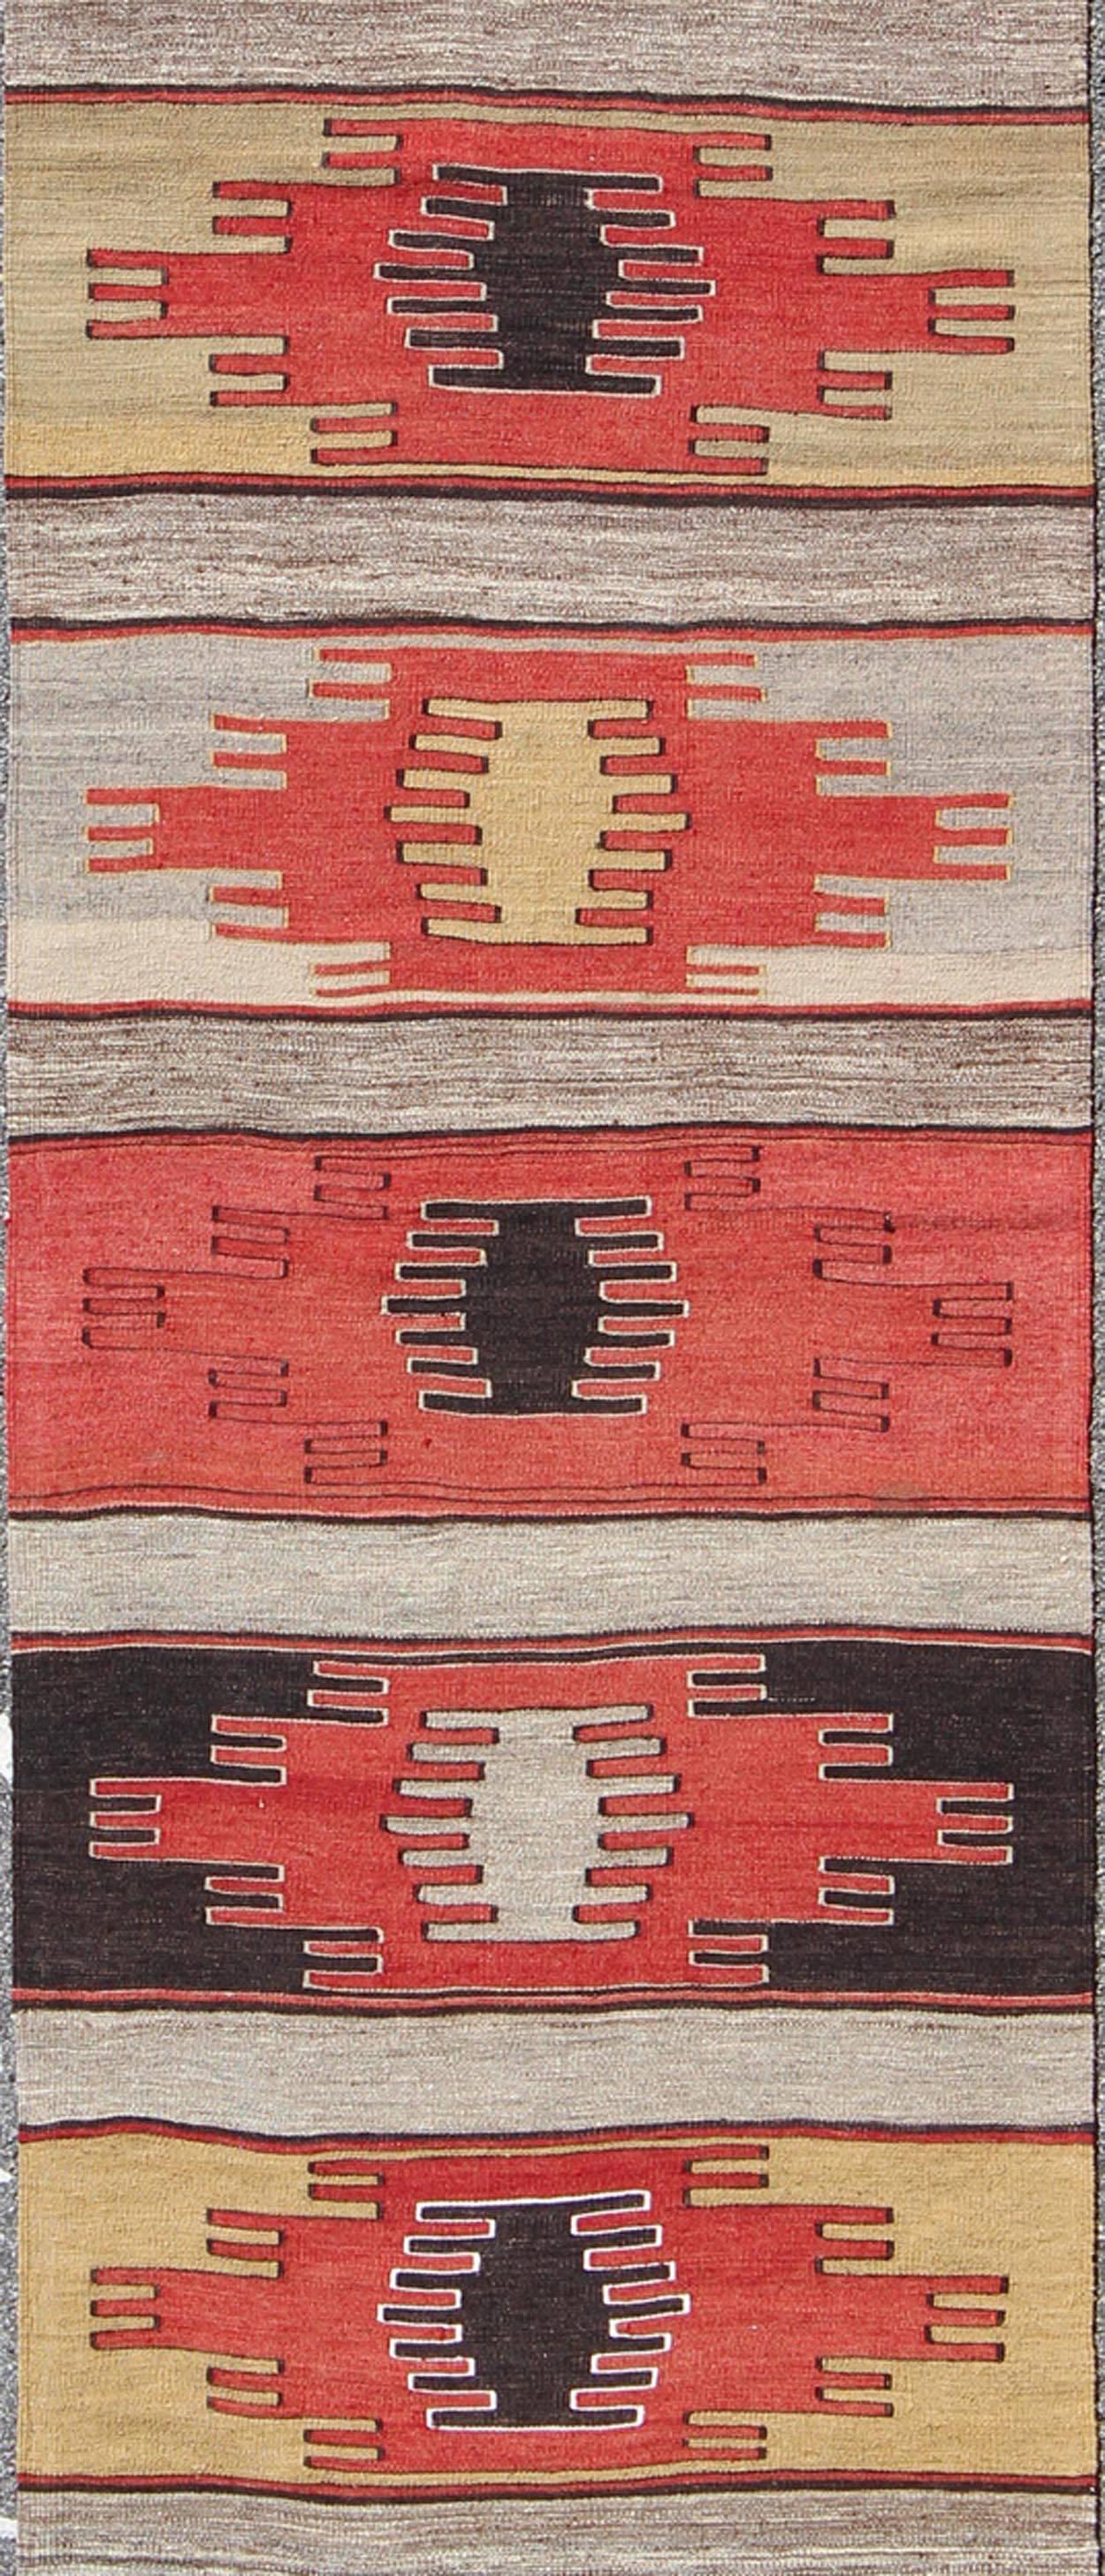 Hand-Woven Vintage Turkish Kilim Runner with Large Geometric Medallions and Stripe Design